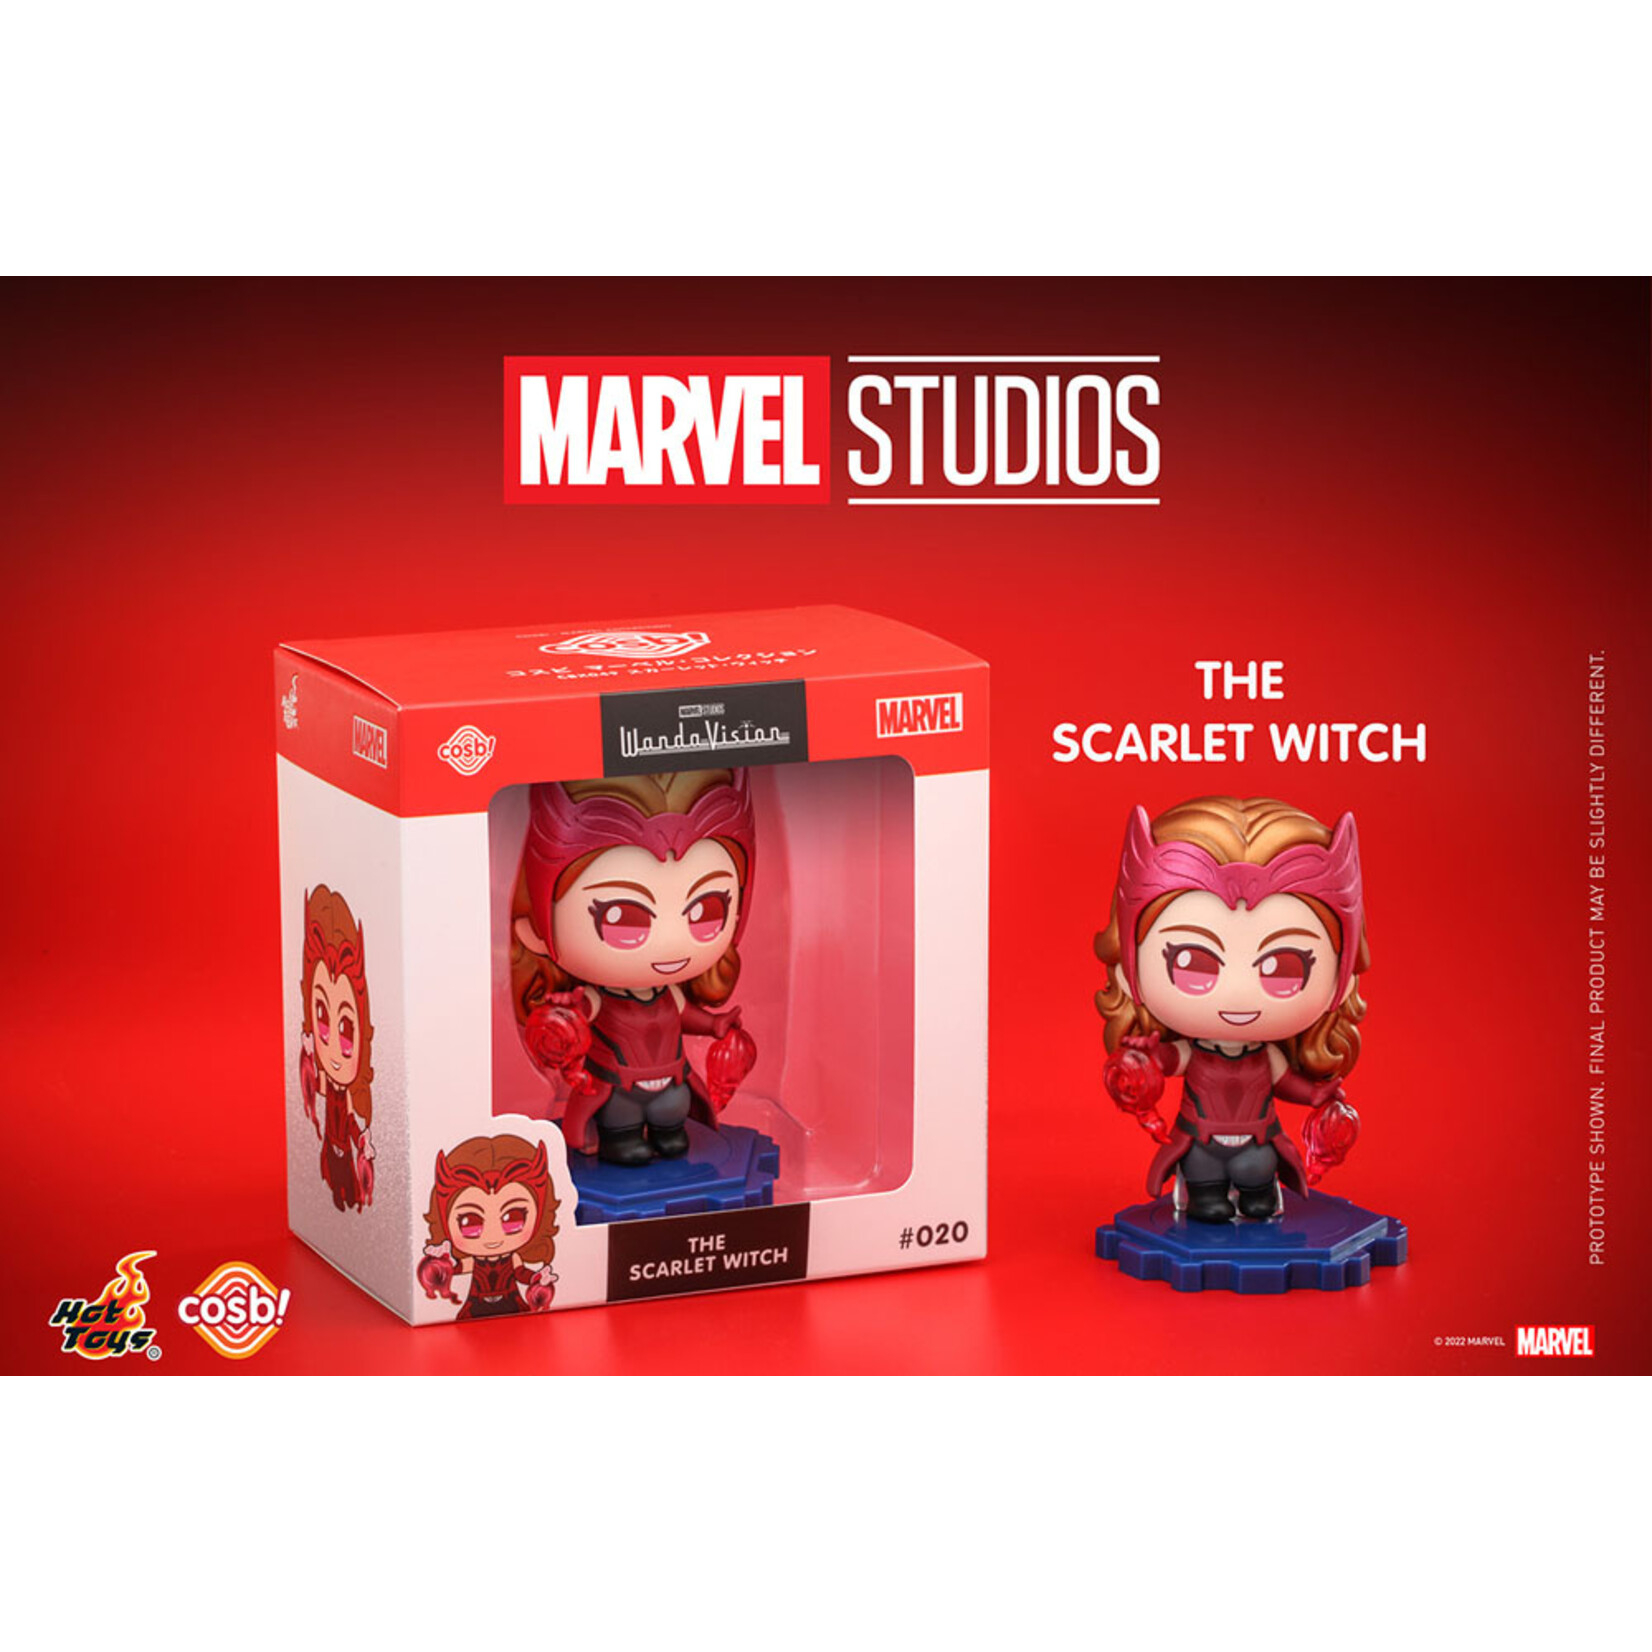 Hot Toys Hot Toys Marvel Cosbi Mini Figure Scarlet Witch